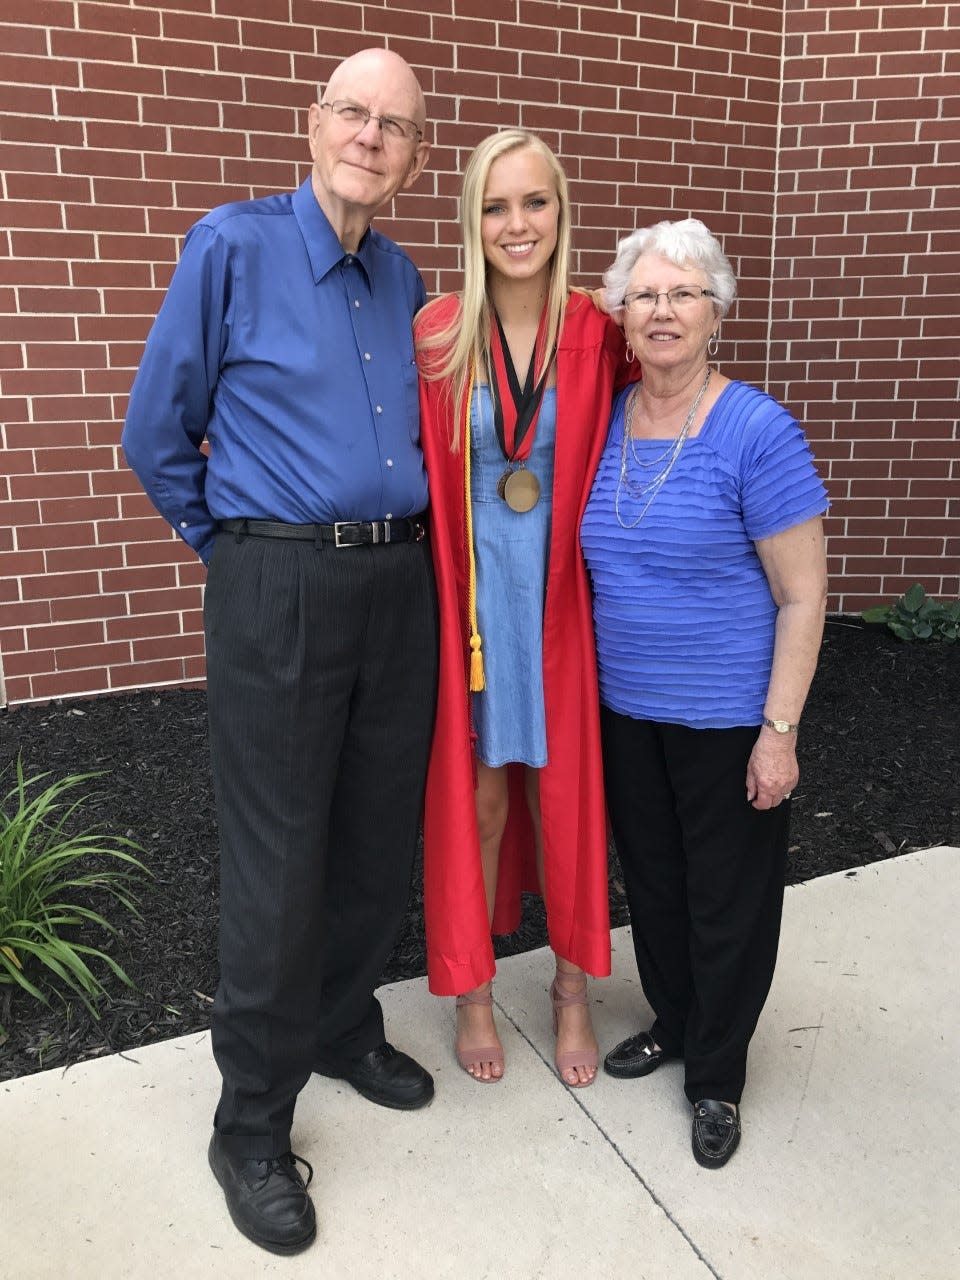 Richard and Marjorie Johnson attend the high school graduation of their granddaughter, Kacie Thompson.